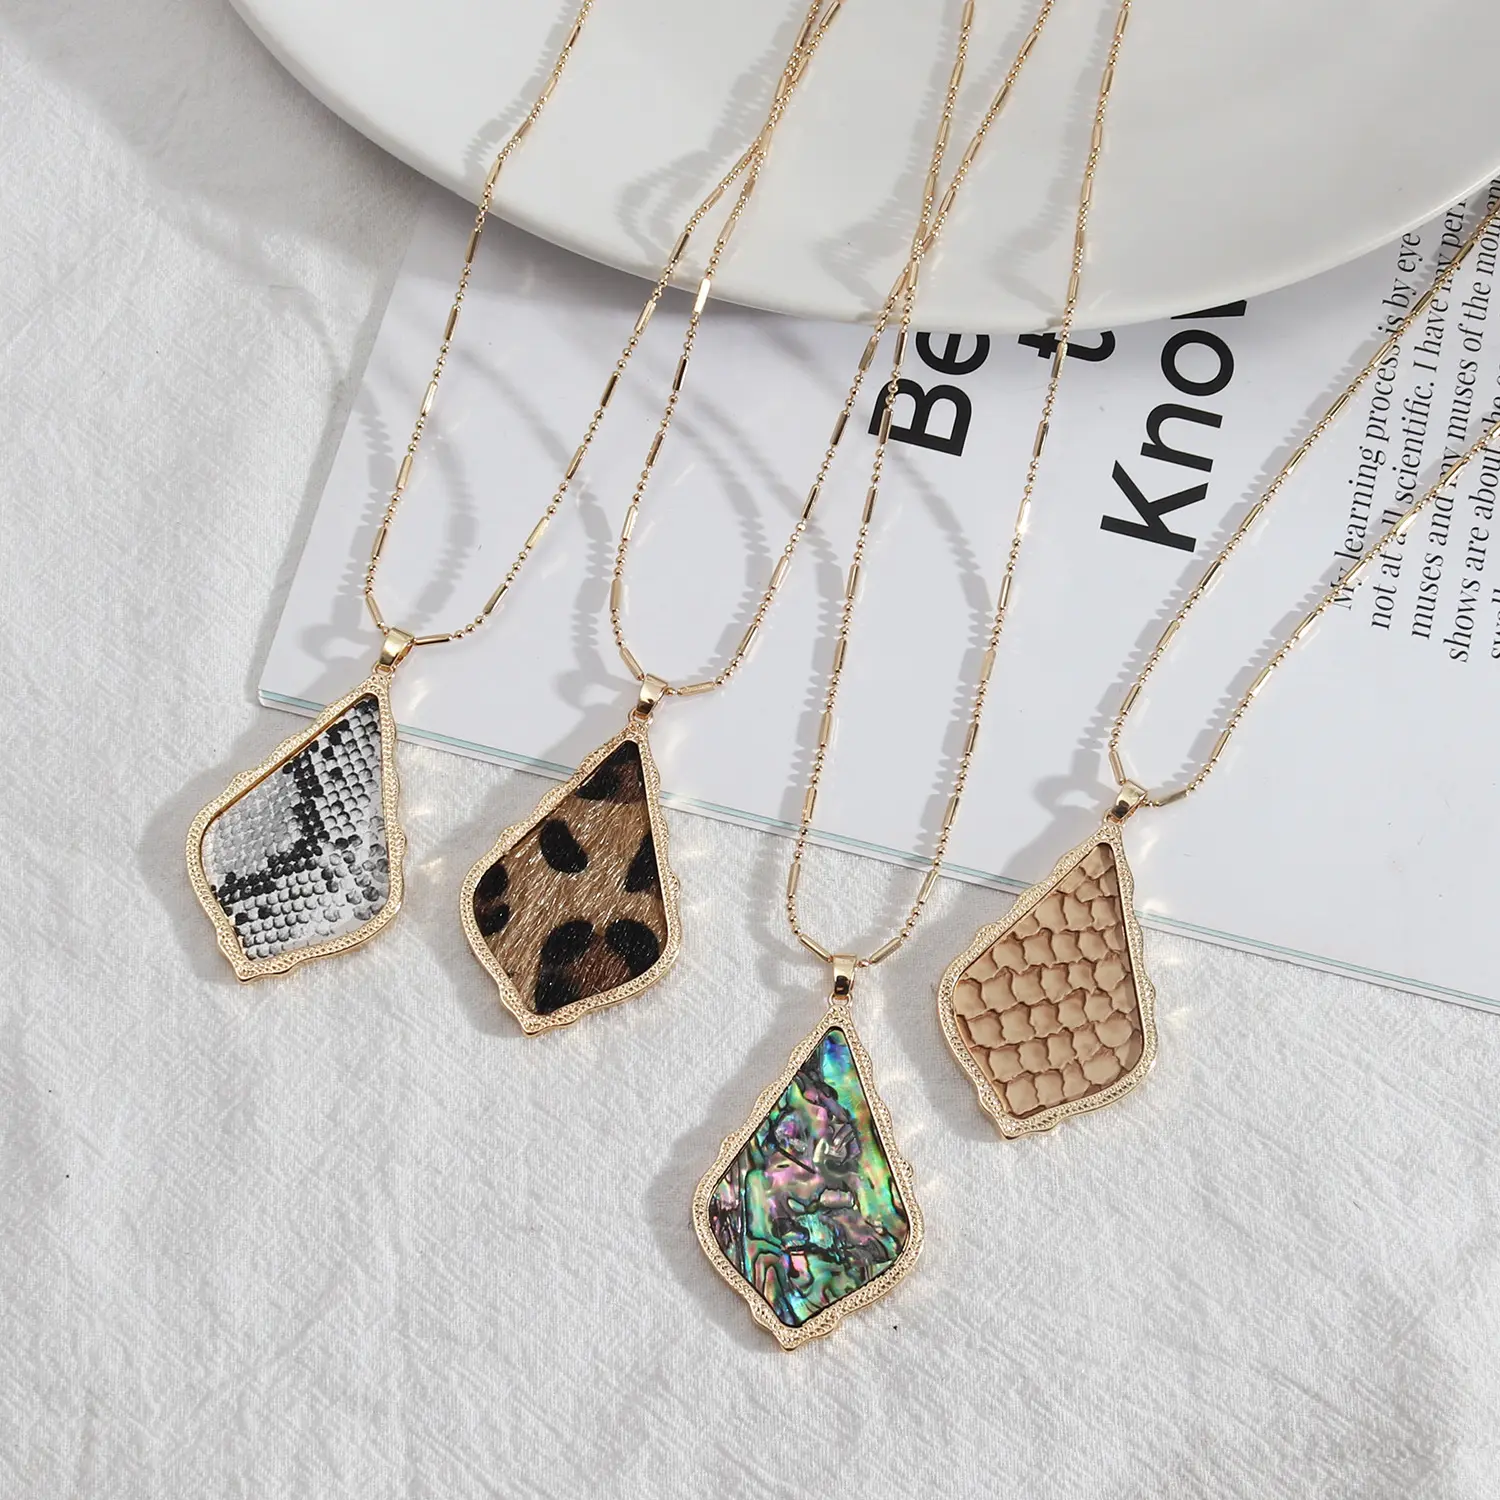 PJ-C491 Gold-plated leather abalone shell necklace pendant instagram fashion trend sweater chain